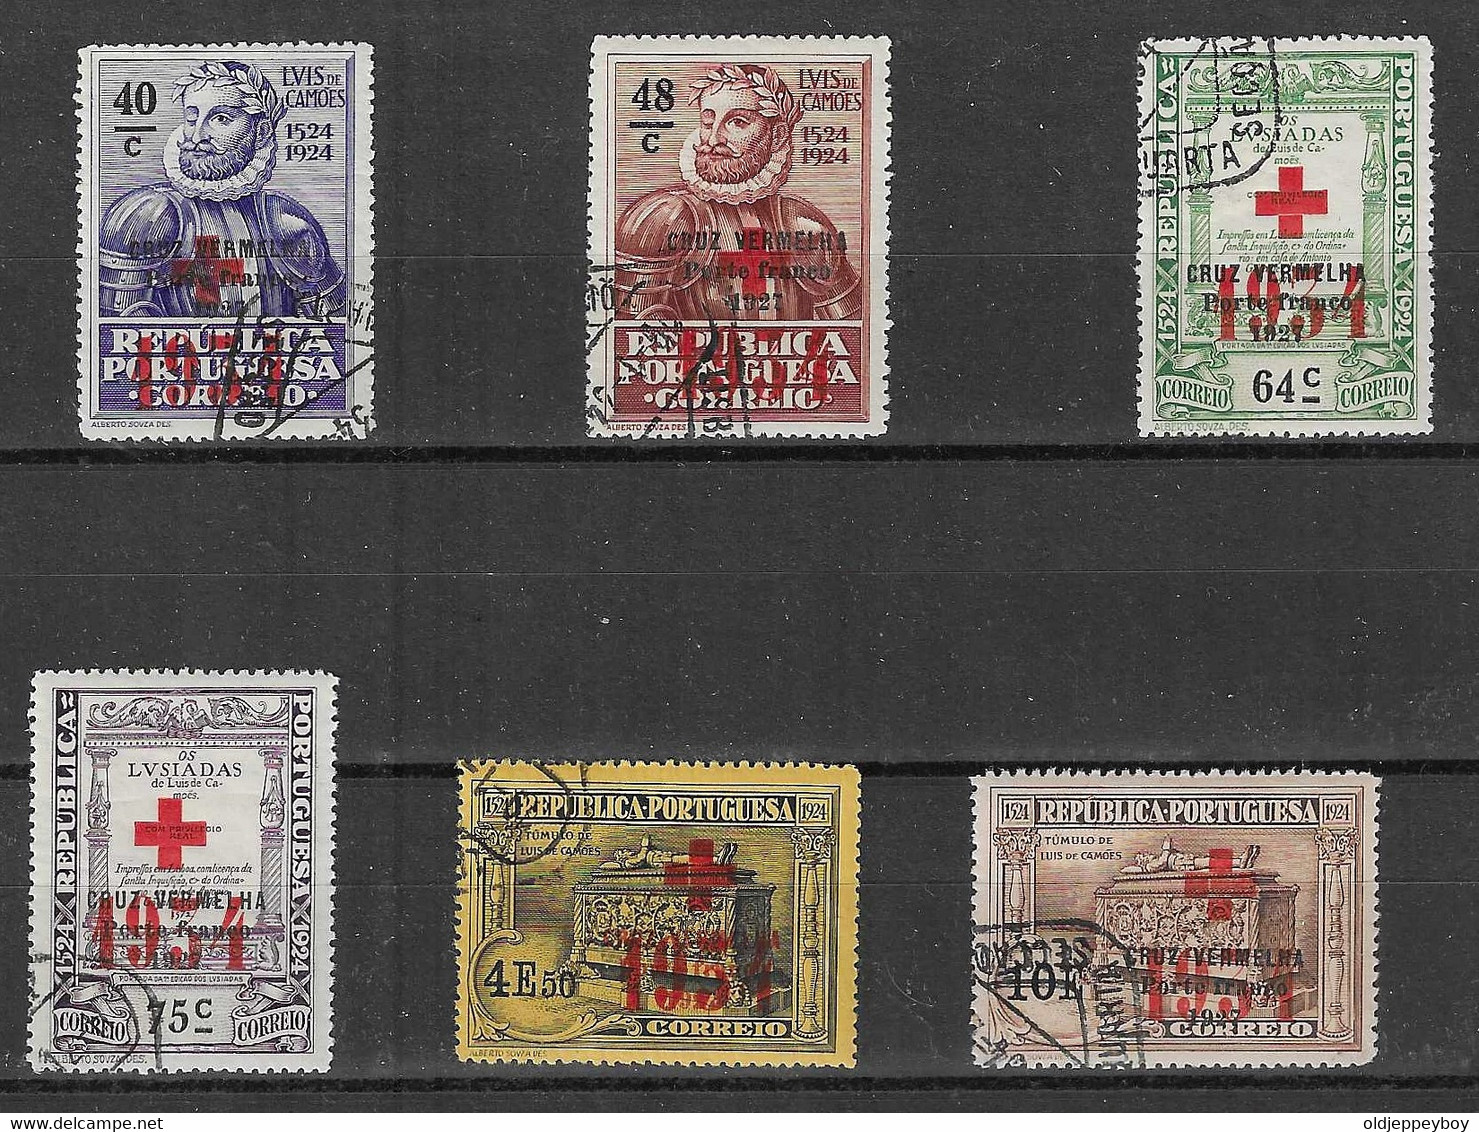 CROIX ROUGE CRUZ VERMELHA  Portugal - 1934 Camoes Franchise Red Cross (Complete Set) - USED - Rode Kruis